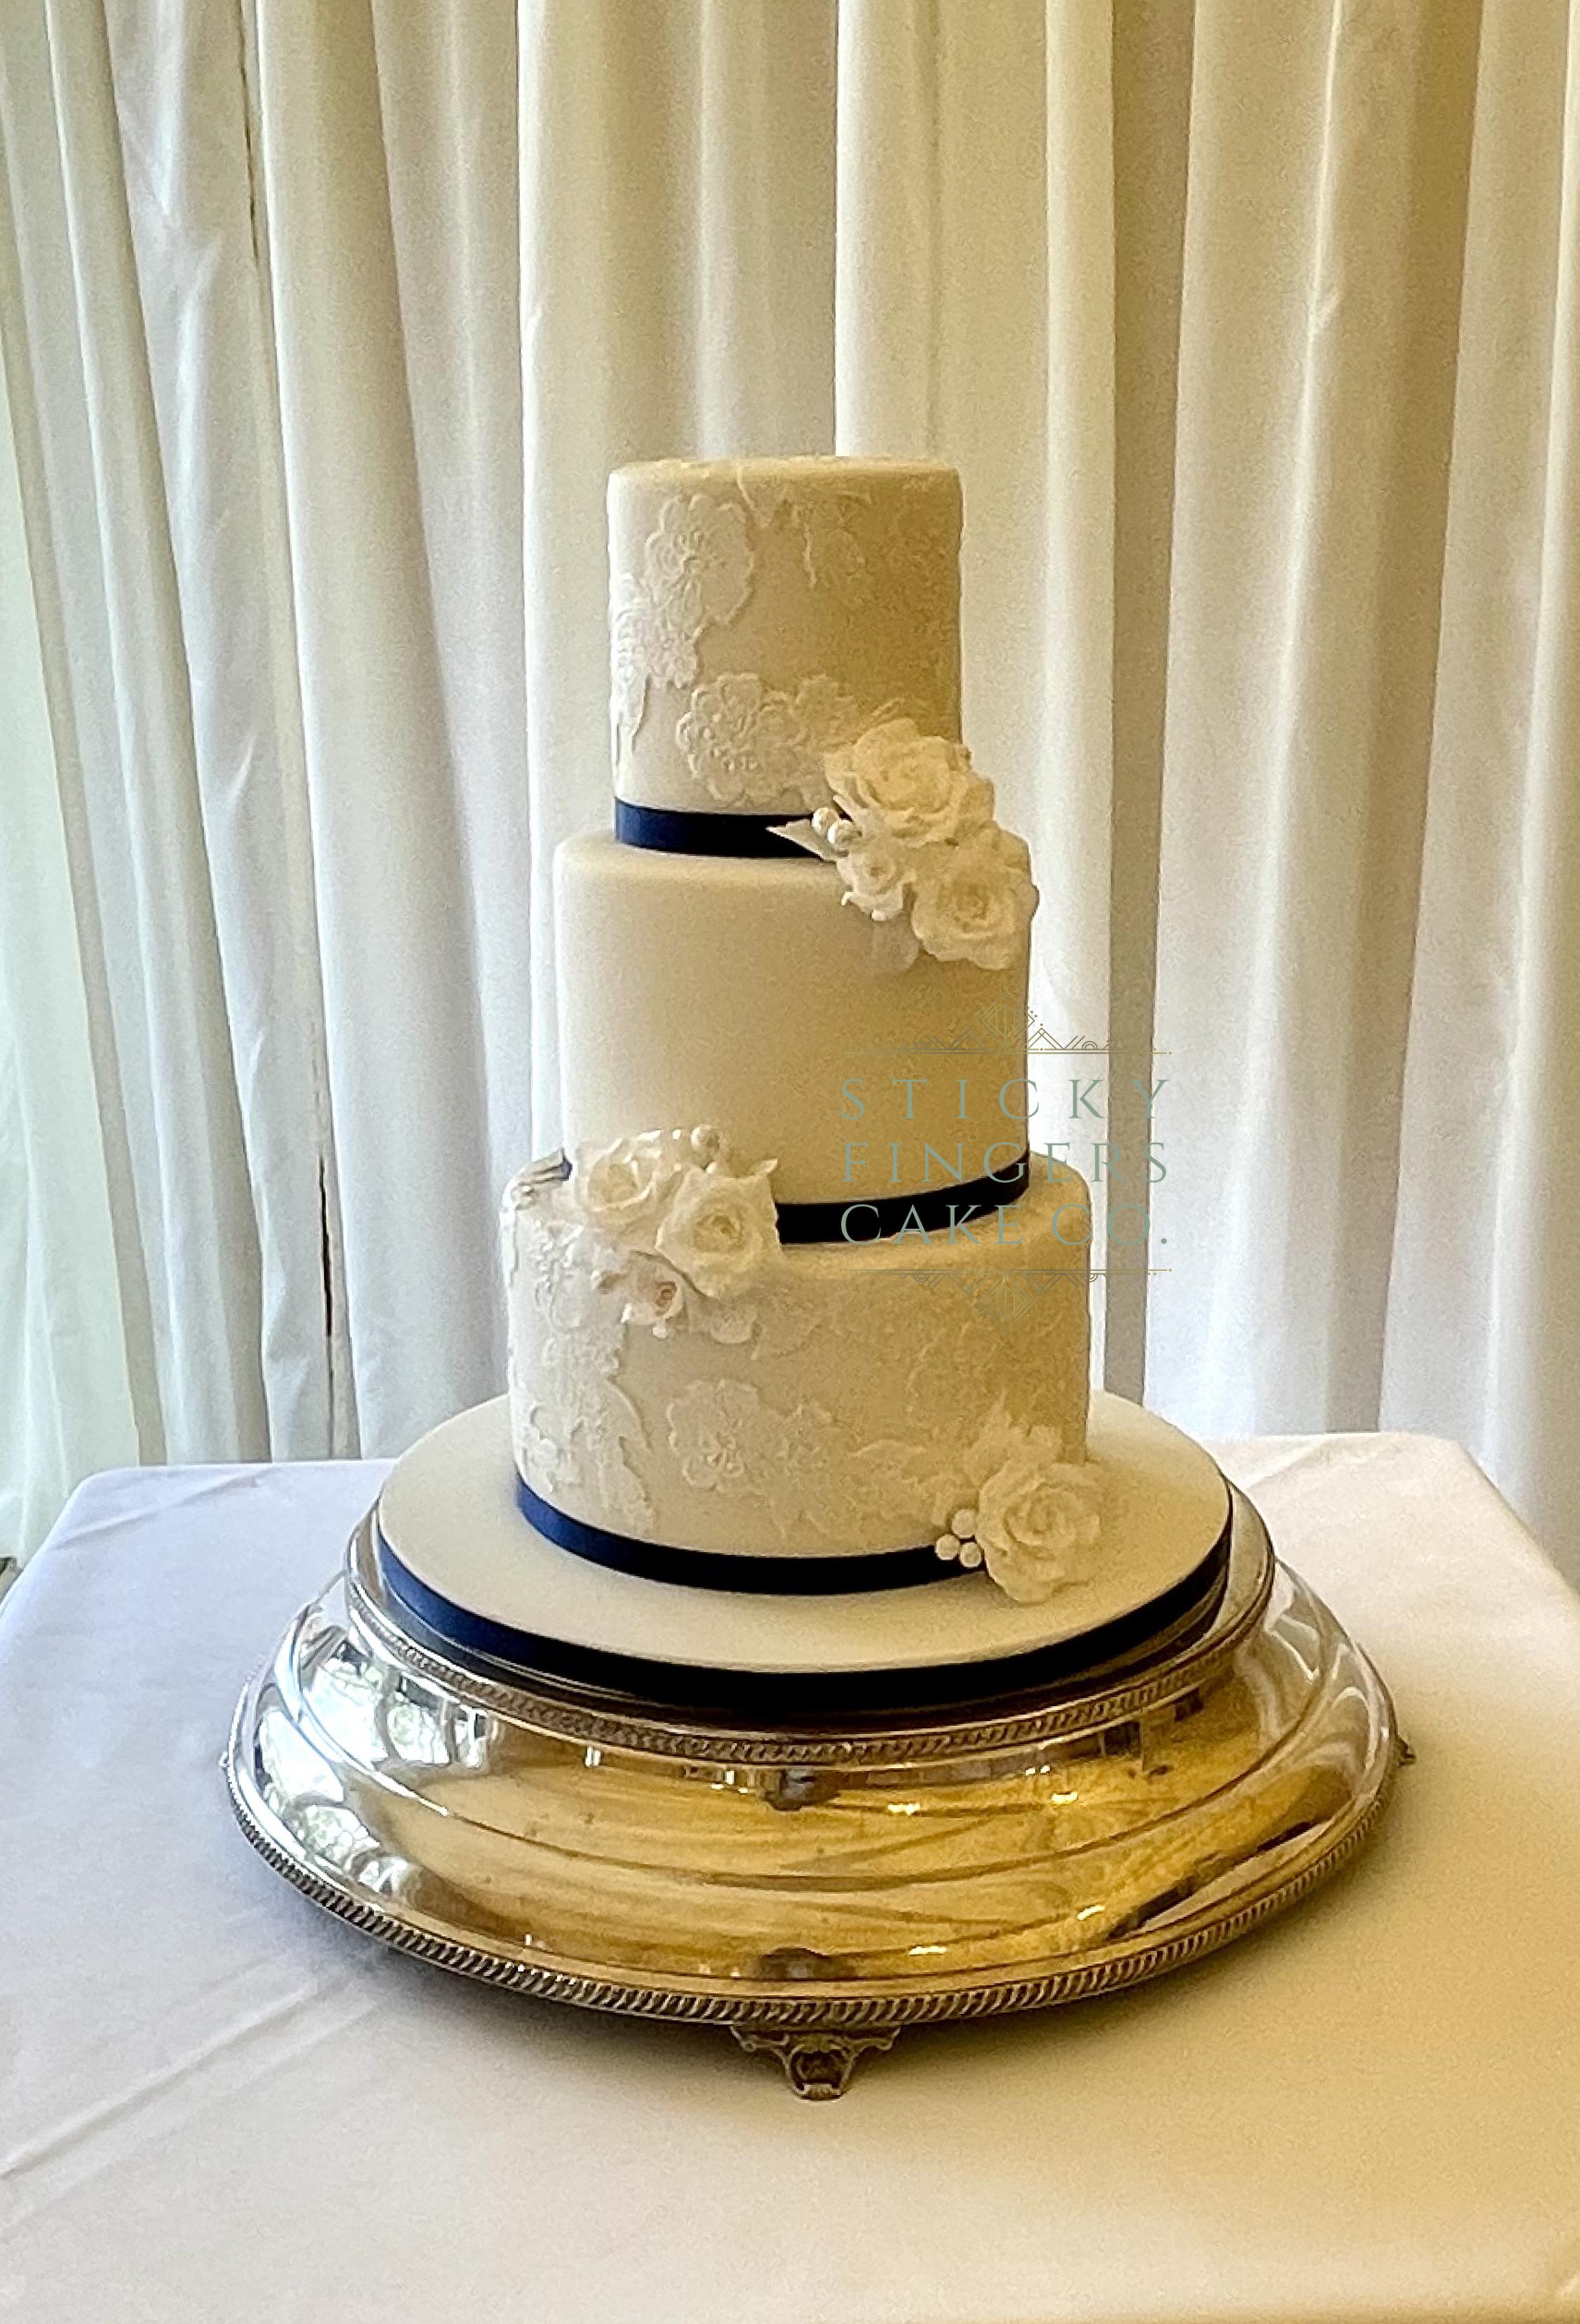 3-Tier Wedding Cake, Mulberry House, Ongar – March 2022